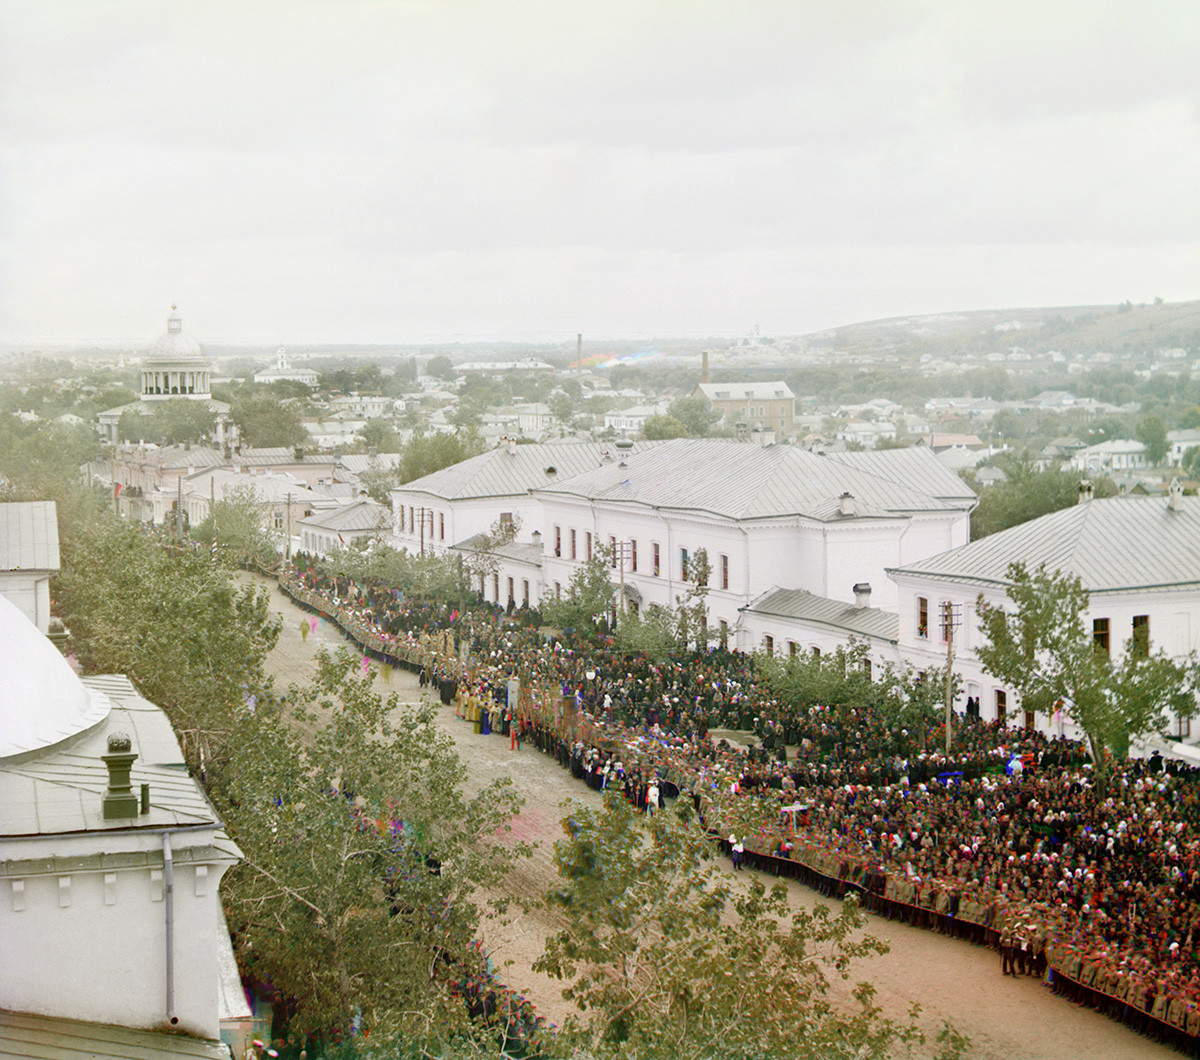 Cathedral Square, view east from Trinity Monastery bell tower on September 4, 1911. Dignitaries & crowds gathered for Procession of the Cross in homage to the canonization of St. Ioasaph. Left distance: domed Cathedral of the Nativity of the Virgin Convent